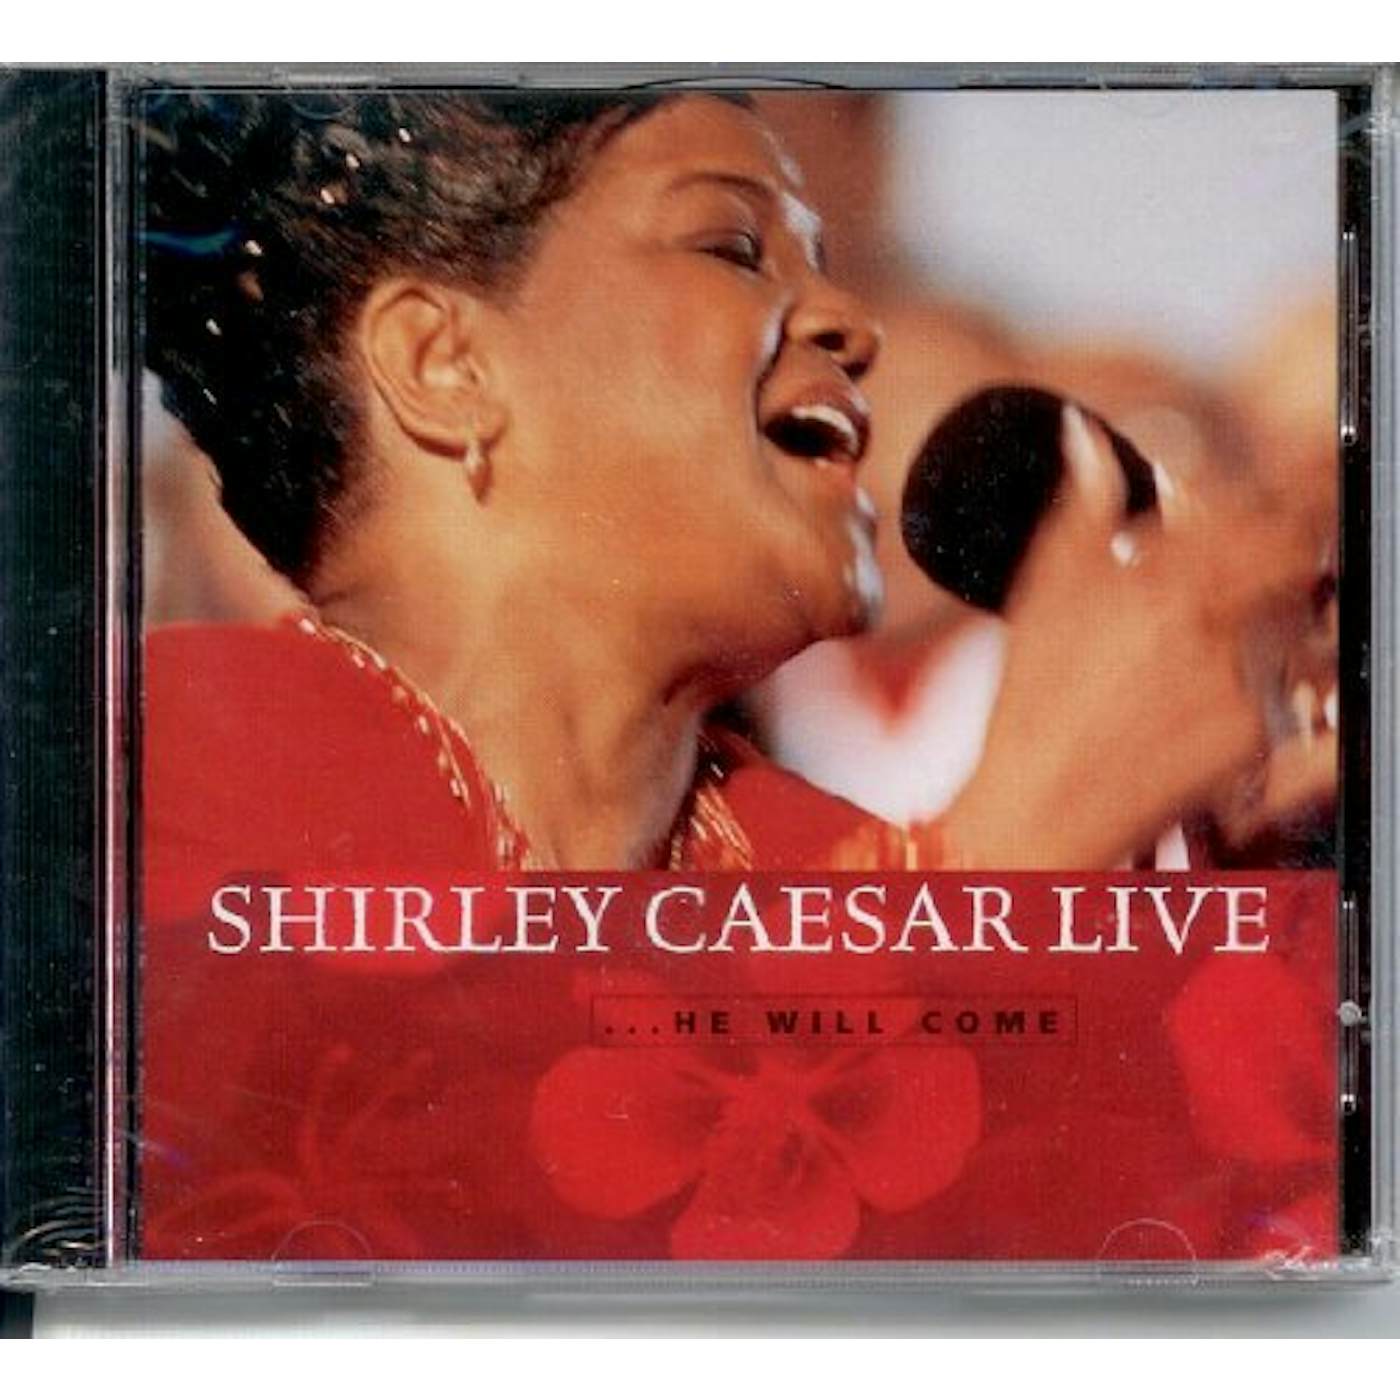 Shirley Caesar HE WILL COME LIVE CD